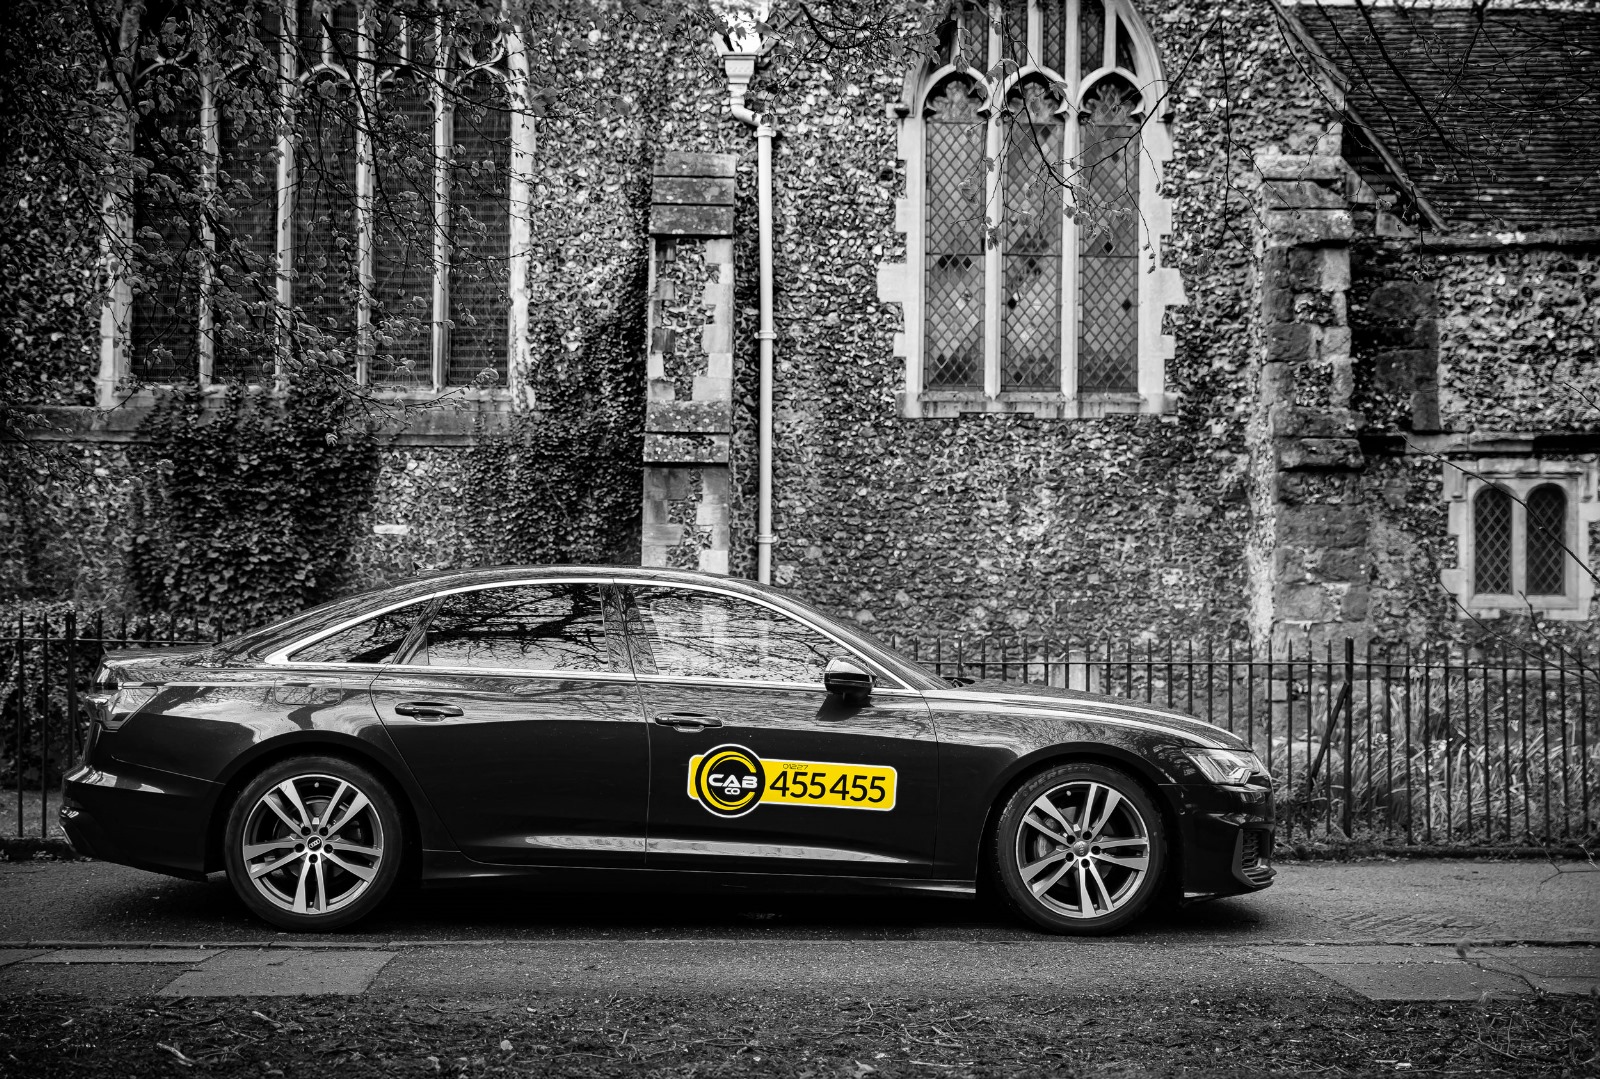 Cab services in Herne Bay